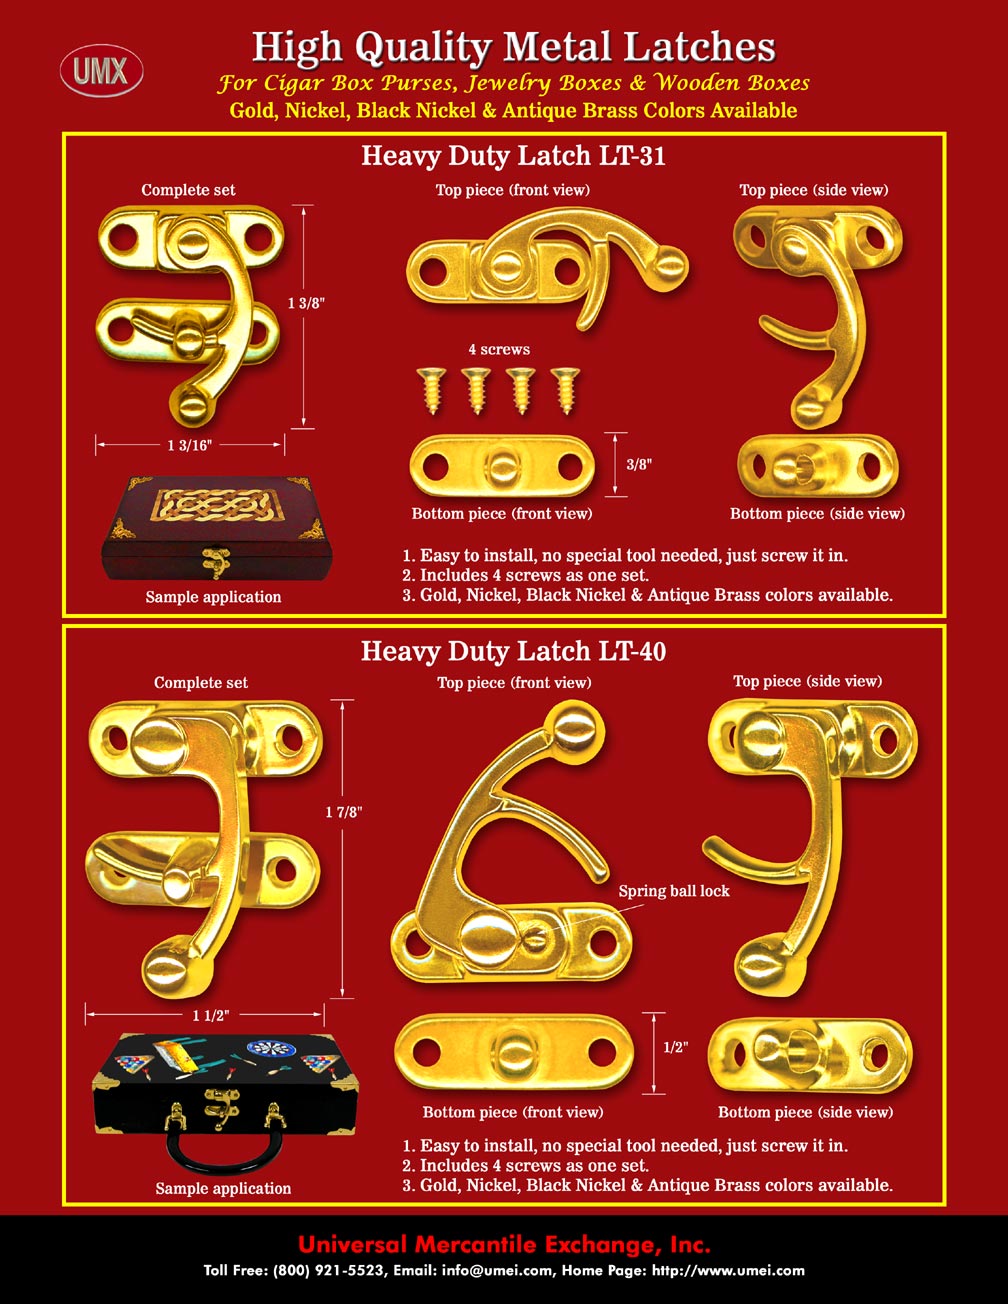 We are manufacturer and designer of cigar box craft latch and wooden jewelry box craft latches with latch knobs. The latch knob will help you to open or close box cover easily.